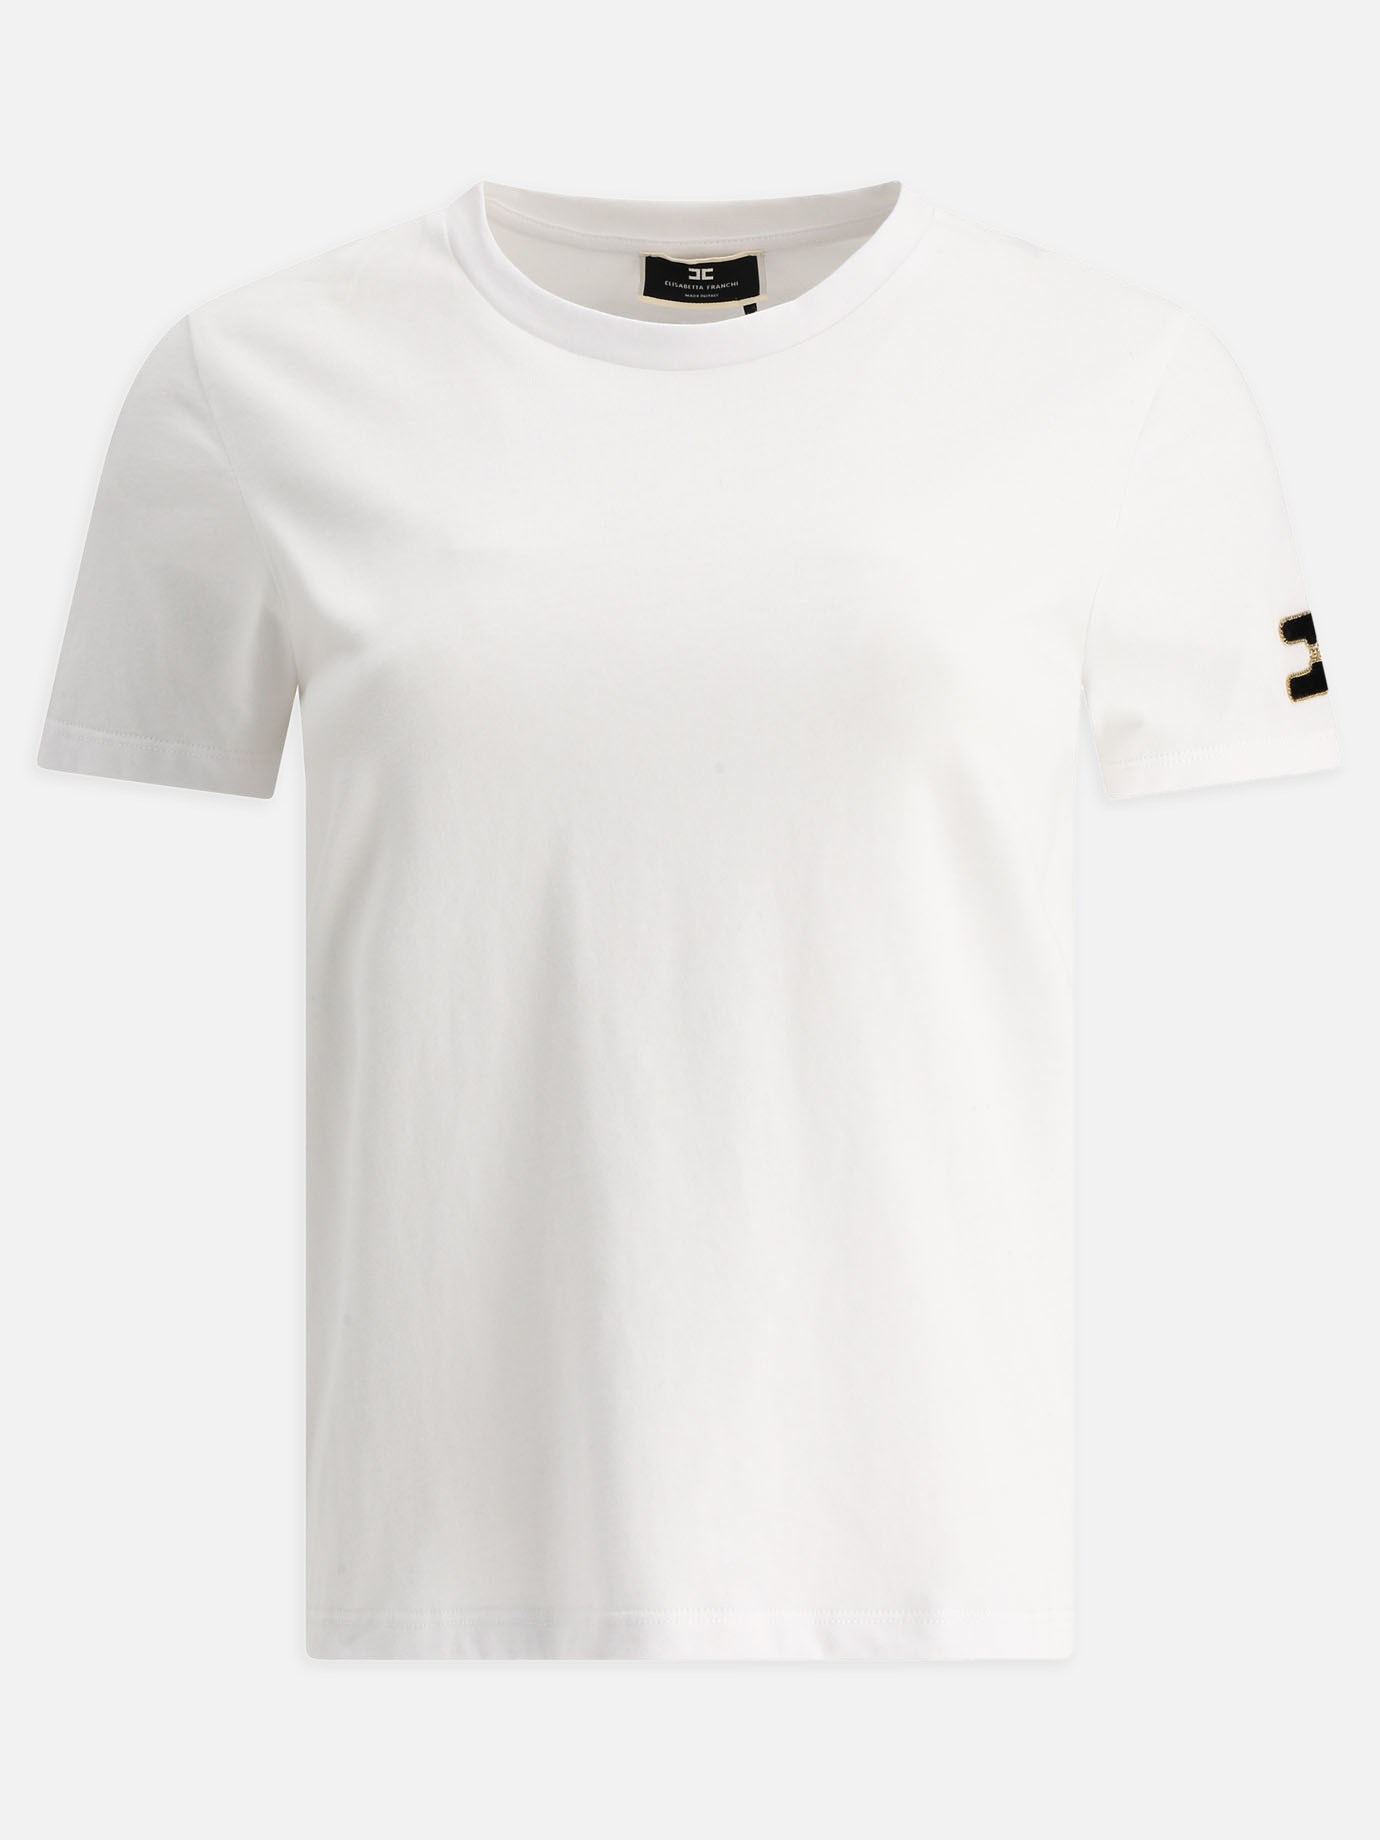 T-shirt with embroidery by Elisabetta Franchi